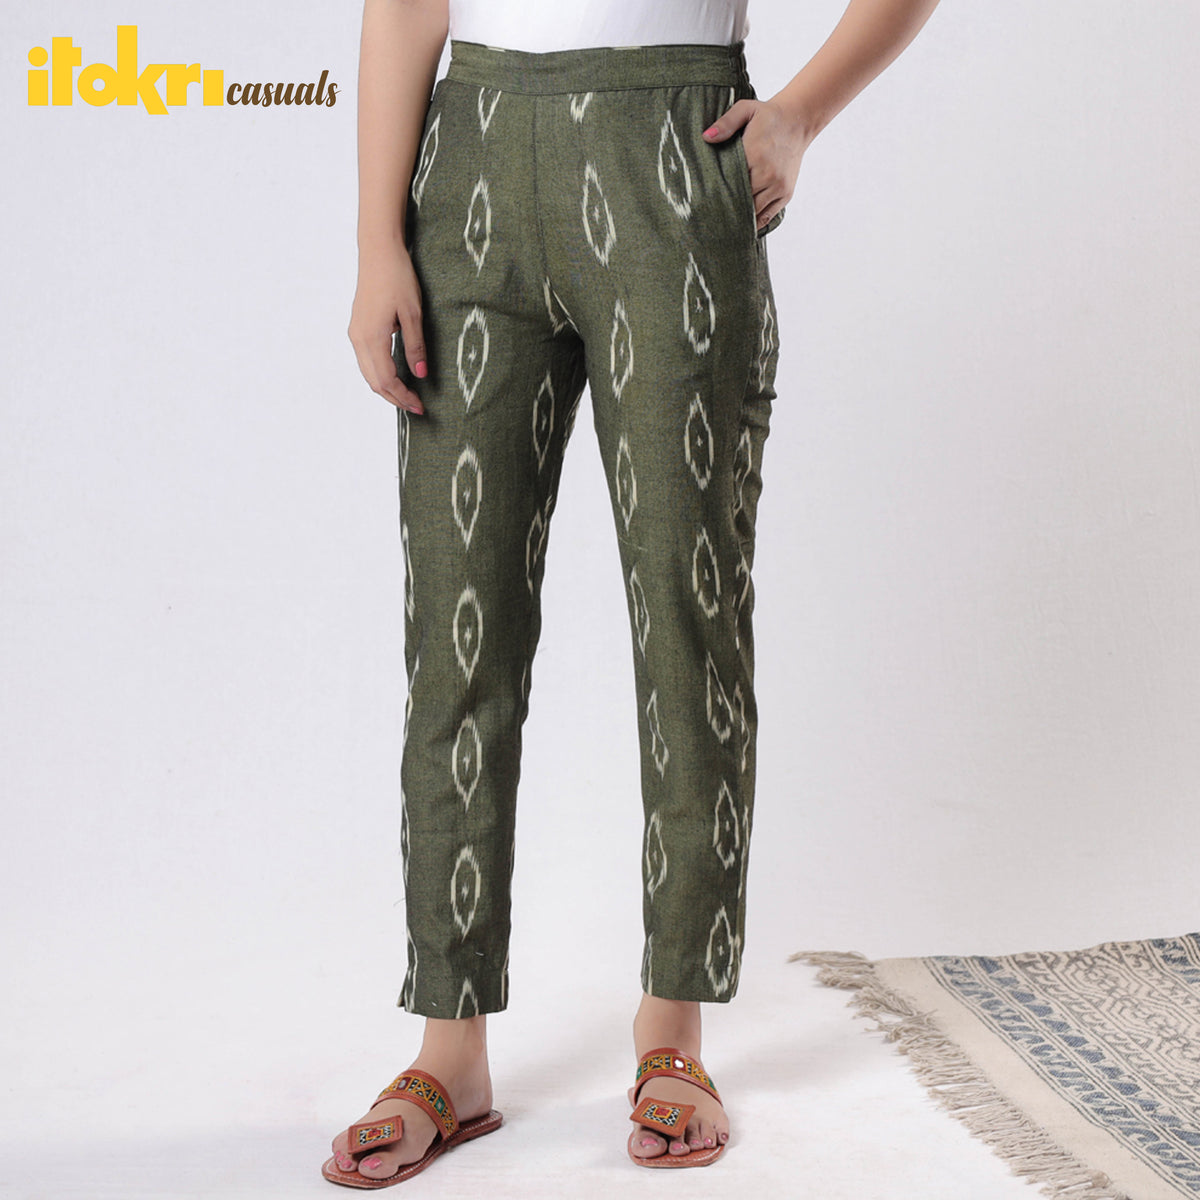 iTokri Casuals - Pochampally Ikat Cotton Tapered Casual Pant for Women